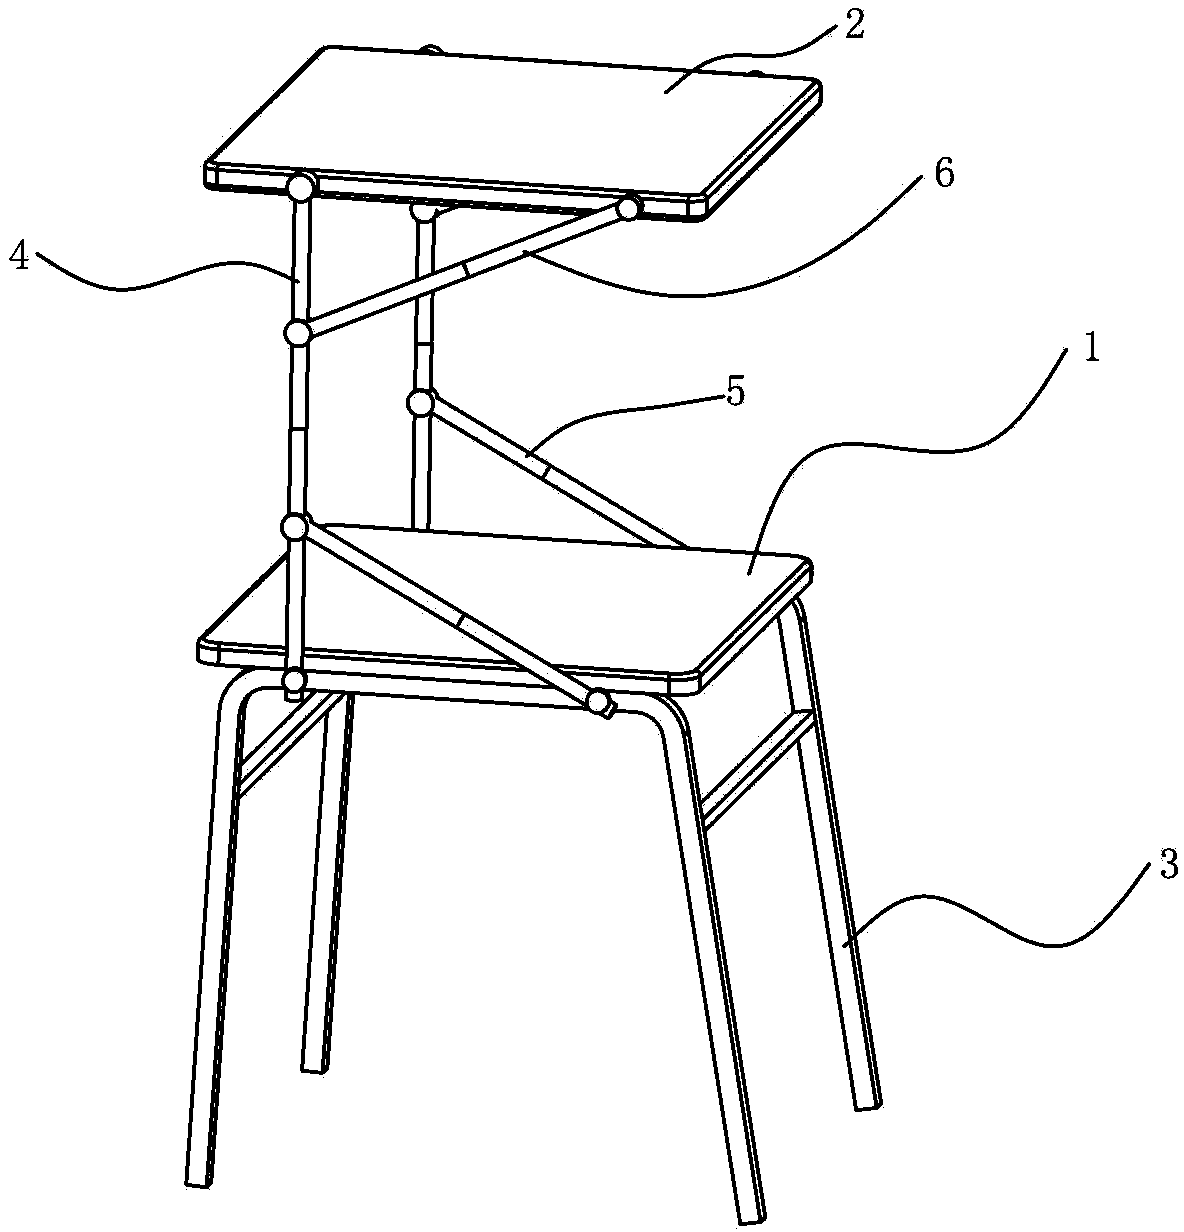 Table-stool integrated chair